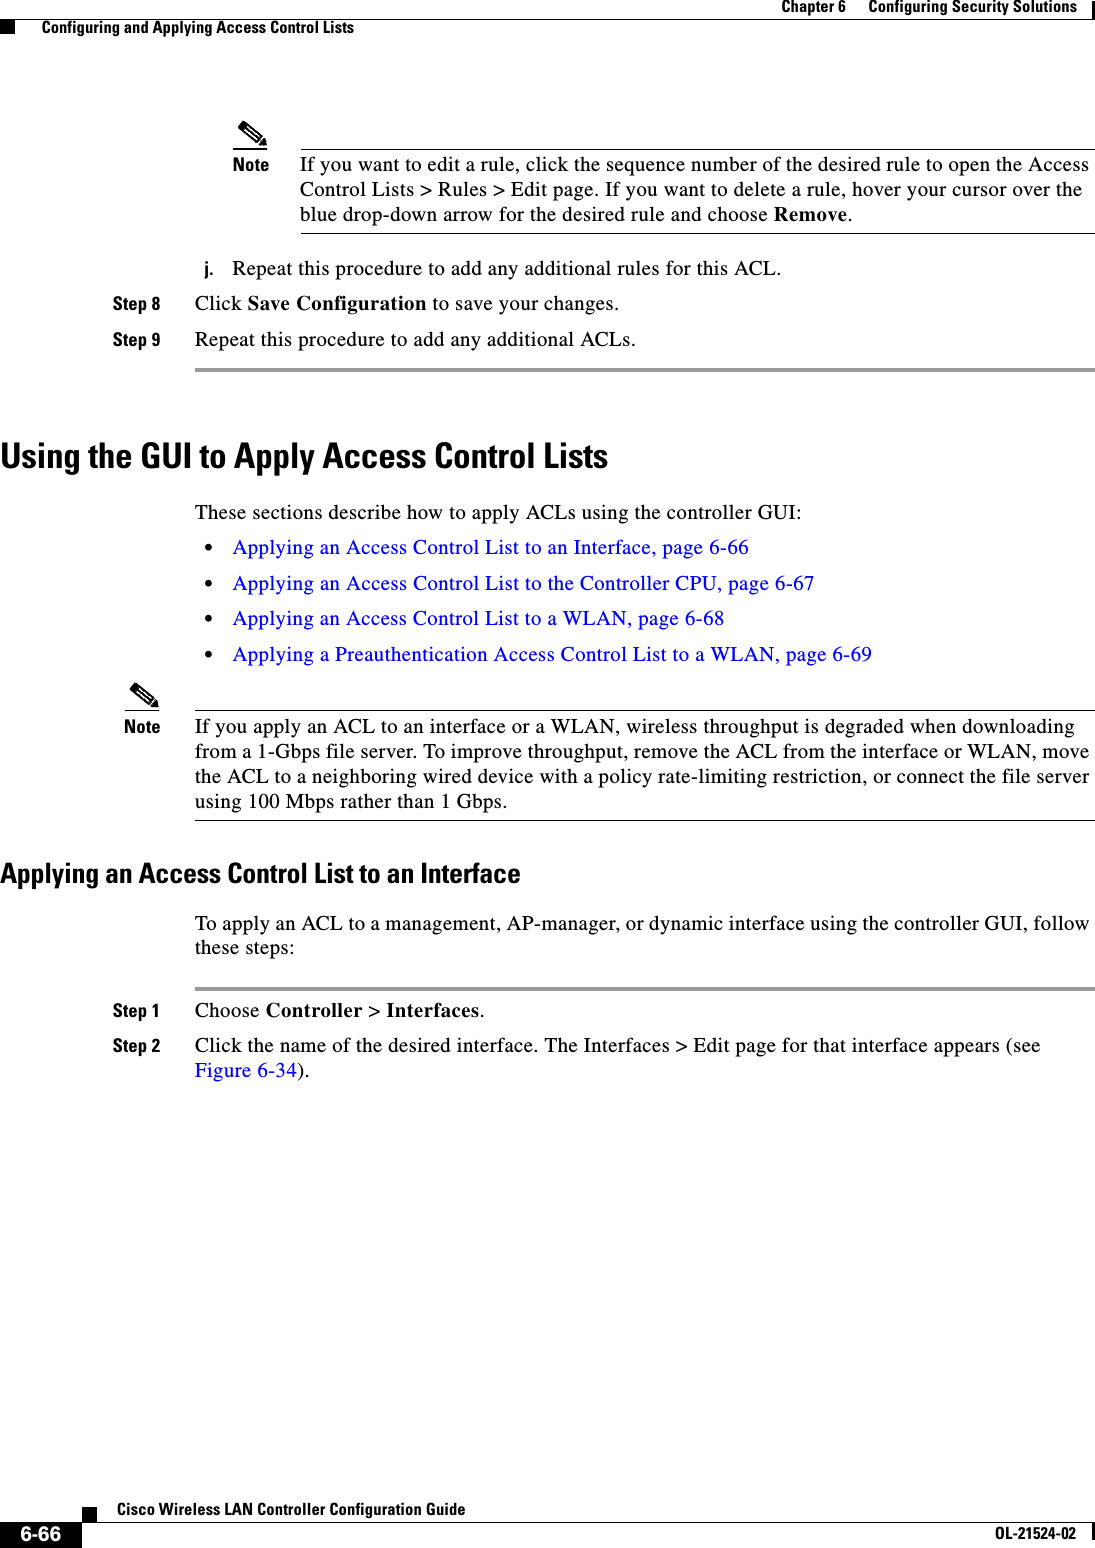  6-66Cisco Wireless LAN Controller Configuration GuideOL-21524-02Chapter 6      Configuring Security Solutions  Configuring and Applying Access Control ListsNote If you want to edit a rule, click the sequence number of the desired rule to open the Access Control Lists &gt; Rules &gt; Edit page. If you want to delete a rule, hover your cursor over the blue drop-down arrow for the desired rule and choose Remove.j. Repeat this procedure to add any additional rules for this ACL.Step 8 Click Save Configuration to save your changes.Step 9 Repeat this procedure to add any additional ACLs.Using the GUI to Apply Access Control ListsThese sections describe how to apply ACLs using the controller GUI:  • Applying an Access Control List to an Interface, page 6-66  • Applying an Access Control List to the Controller CPU, page 6-67  • Applying an Access Control List to a WLAN, page 6-68  • Applying a Preauthentication Access Control List to a WLAN, page 6-69Note If you apply an ACL to an interface or a WLAN, wireless throughput is degraded when downloading from a 1-Gbps file server. To improve throughput, remove the ACL from the interface or WLAN, move the ACL to a neighboring wired device with a policy rate-limiting restriction, or connect the file server using 100 Mbps rather than 1 Gbps.Applying an Access Control List to an InterfaceTo apply an ACL to a management, AP-manager, or dynamic interface using the controller GUI, follow these steps:Step 1 Choose Controller &gt; Interfaces.Step 2 Click the name of the desired interface. The Interfaces &gt; Edit page for that interface appears (see Figure 6-34).